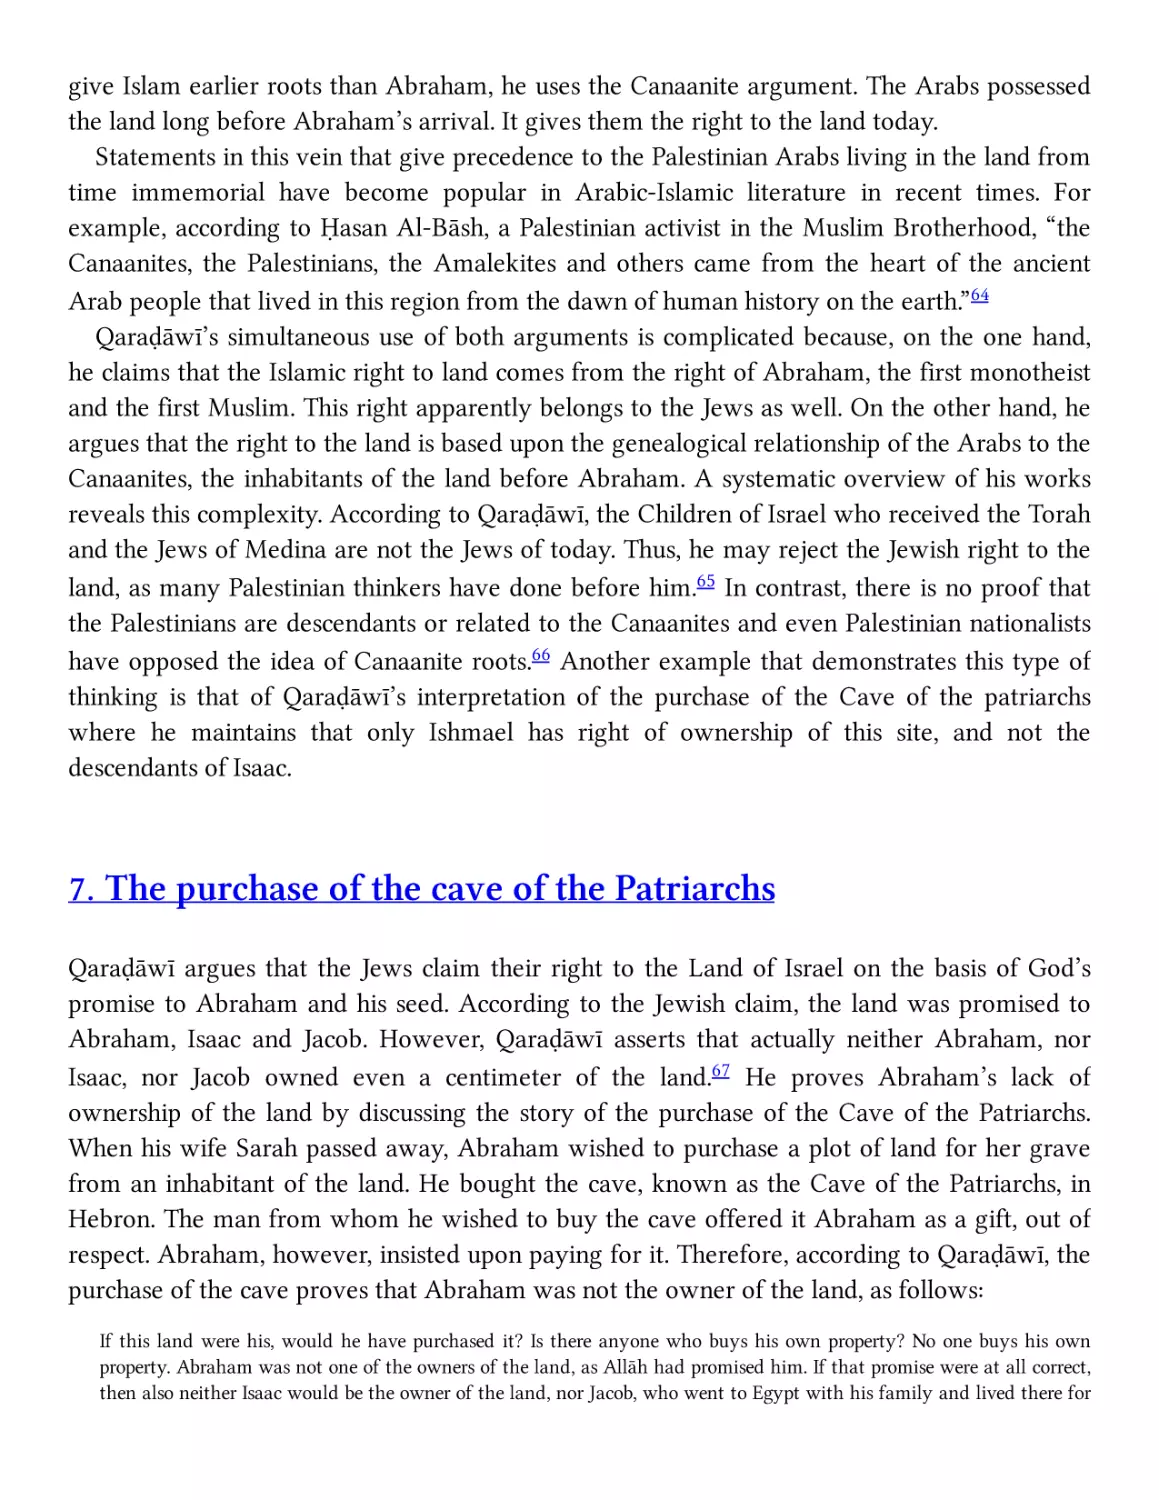 7. The purchase of the cave of the Patriarchs